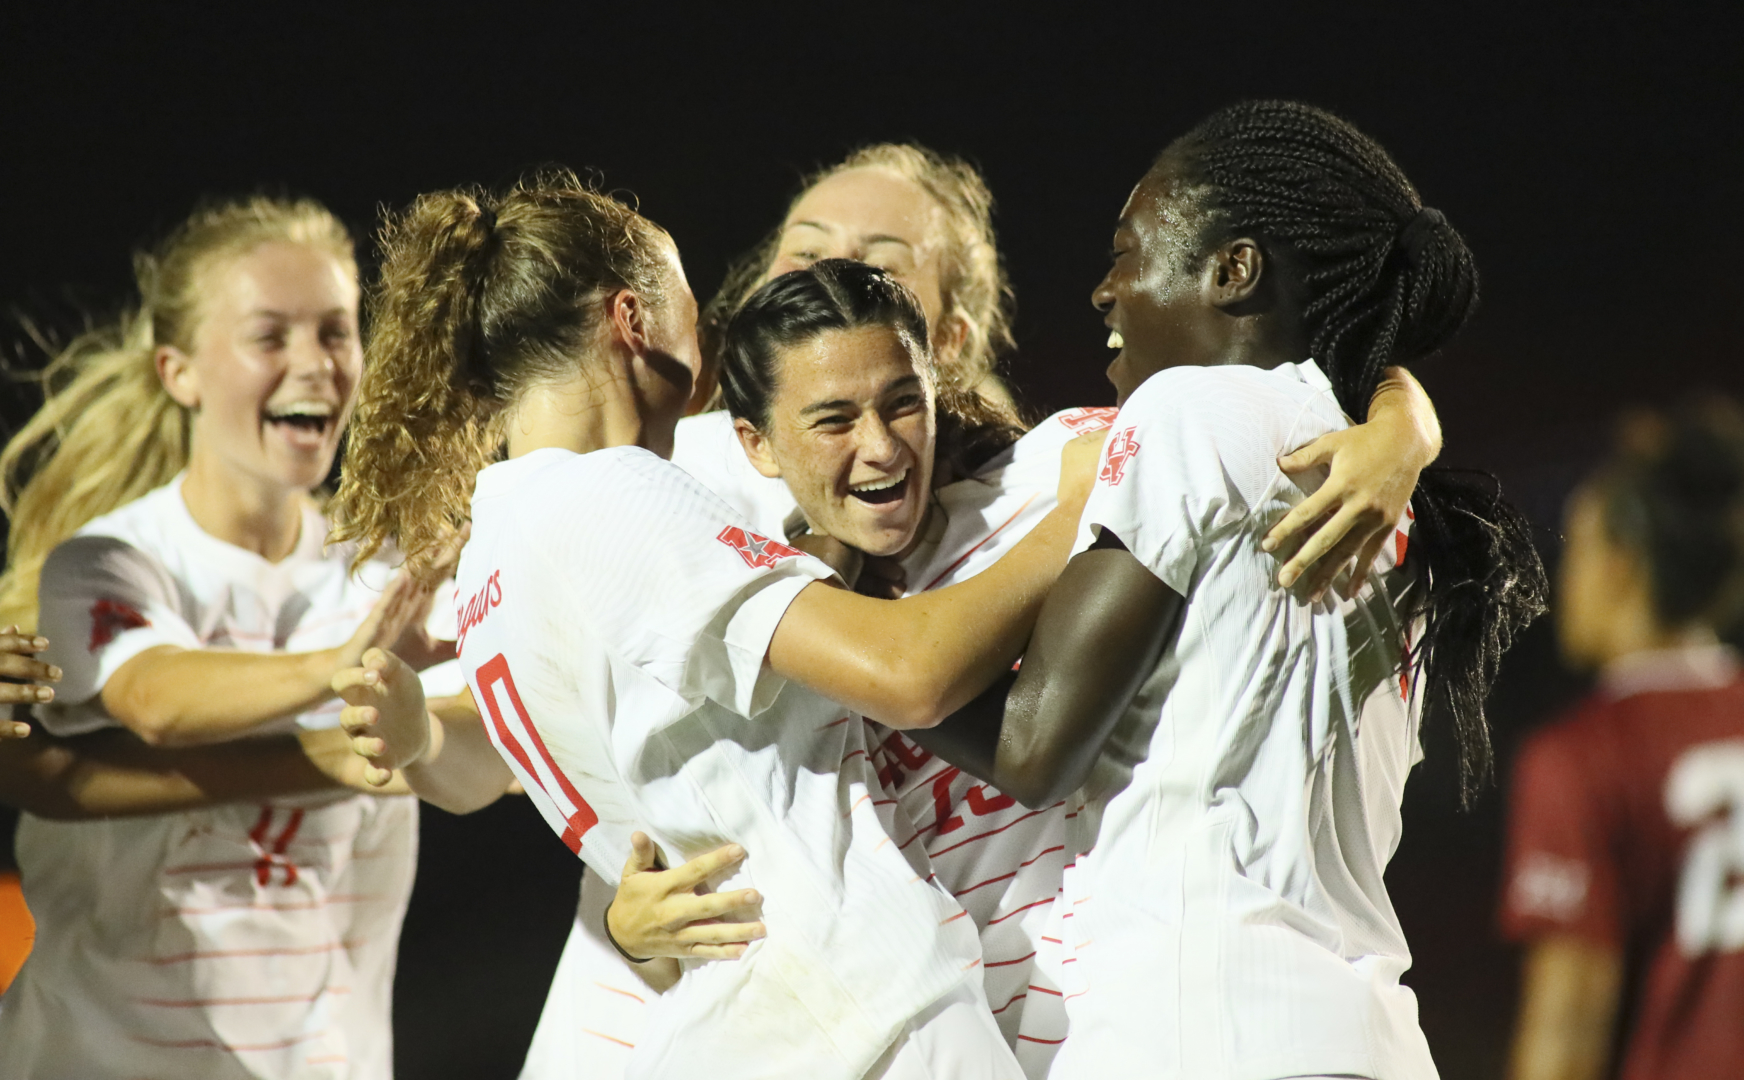 Thursday night was all smiles for the UH soccer team, as the Cougars kicked off their season with a big win over Oklahoma. | Courtesy of UH athletics